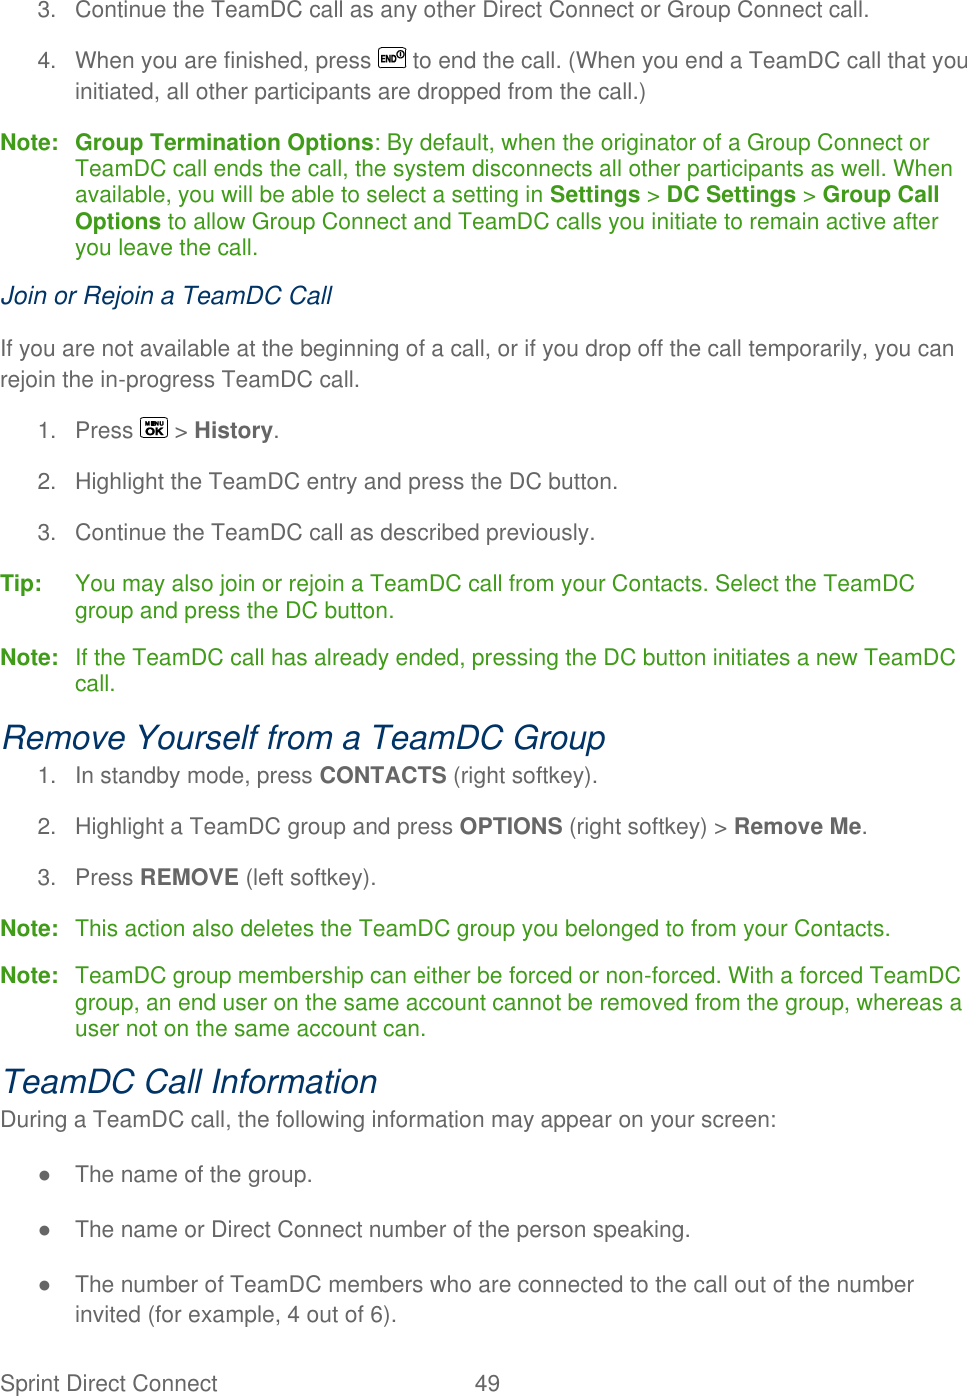  Sprint Direct Connect  49   3.  Continue the TeamDC call as any other Direct Connect or Group Connect call. 4.  When you are finished, press   to end the call. (When you end a TeamDC call that you initiated, all other participants are dropped from the call.) Note: Group Termination Options: By default, when the originator of a Group Connect or TeamDC call ends the call, the system disconnects all other participants as well. When available, you will be able to select a setting in Settings &gt; DC Settings &gt; Group Call Options to allow Group Connect and TeamDC calls you initiate to remain active after you leave the call. Join or Rejoin a TeamDC Call If you are not available at the beginning of a call, or if you drop off the call temporarily, you can rejoin the in-progress TeamDC call. 1.  Press   &gt; History. 2.  Highlight the TeamDC entry and press the DC button. 3.  Continue the TeamDC call as described previously. Tip:   You may also join or rejoin a TeamDC call from your Contacts. Select the TeamDC group and press the DC button. Note:  If the TeamDC call has already ended, pressing the DC button initiates a new TeamDC call. Remove Yourself from a TeamDC Group 1.  In standby mode, press CONTACTS (right softkey). 2.  Highlight a TeamDC group and press OPTIONS (right softkey) &gt; Remove Me. 3.  Press REMOVE (left softkey). Note:  This action also deletes the TeamDC group you belonged to from your Contacts. Note:  TeamDC group membership can either be forced or non-forced. With a forced TeamDC group, an end user on the same account cannot be removed from the group, whereas a user not on the same account can. TeamDC Call Information During a TeamDC call, the following information may appear on your screen: ●  The name of the group. ●  The name or Direct Connect number of the person speaking. ●  The number of TeamDC members who are connected to the call out of the number invited (for example, 4 out of 6). 